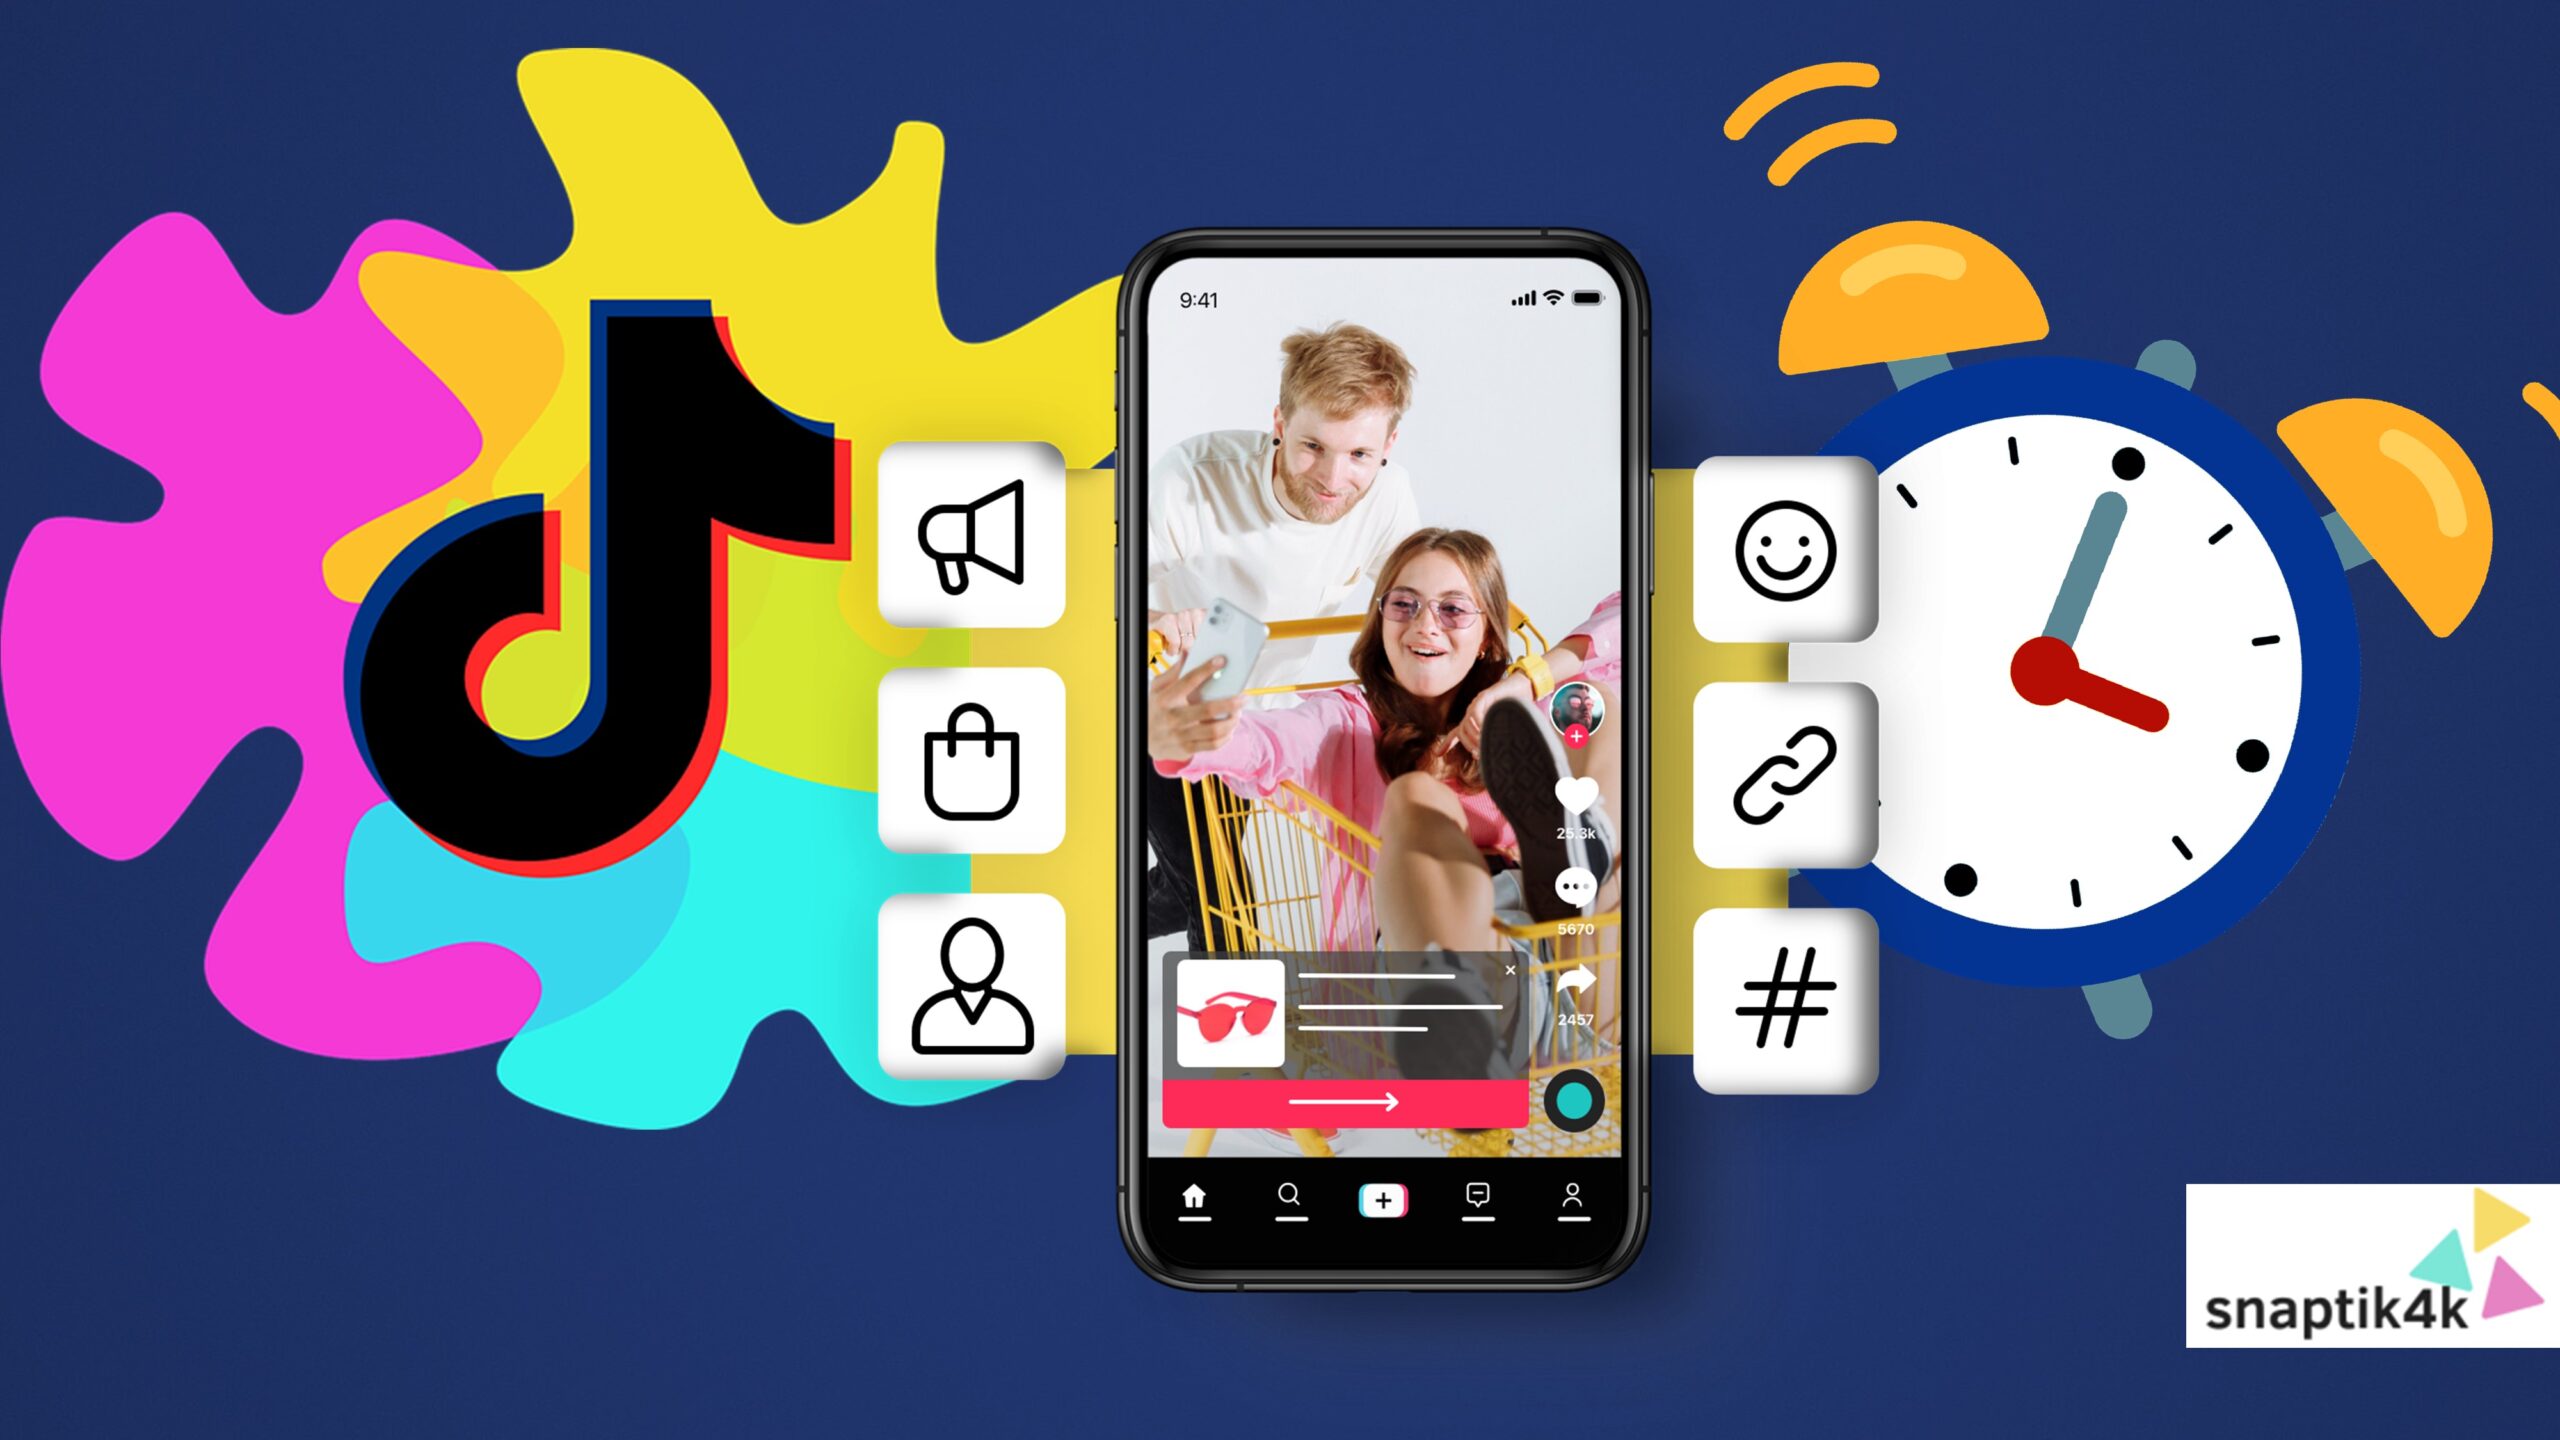 TikTok will allow users to upload videos up to 10 minutes long